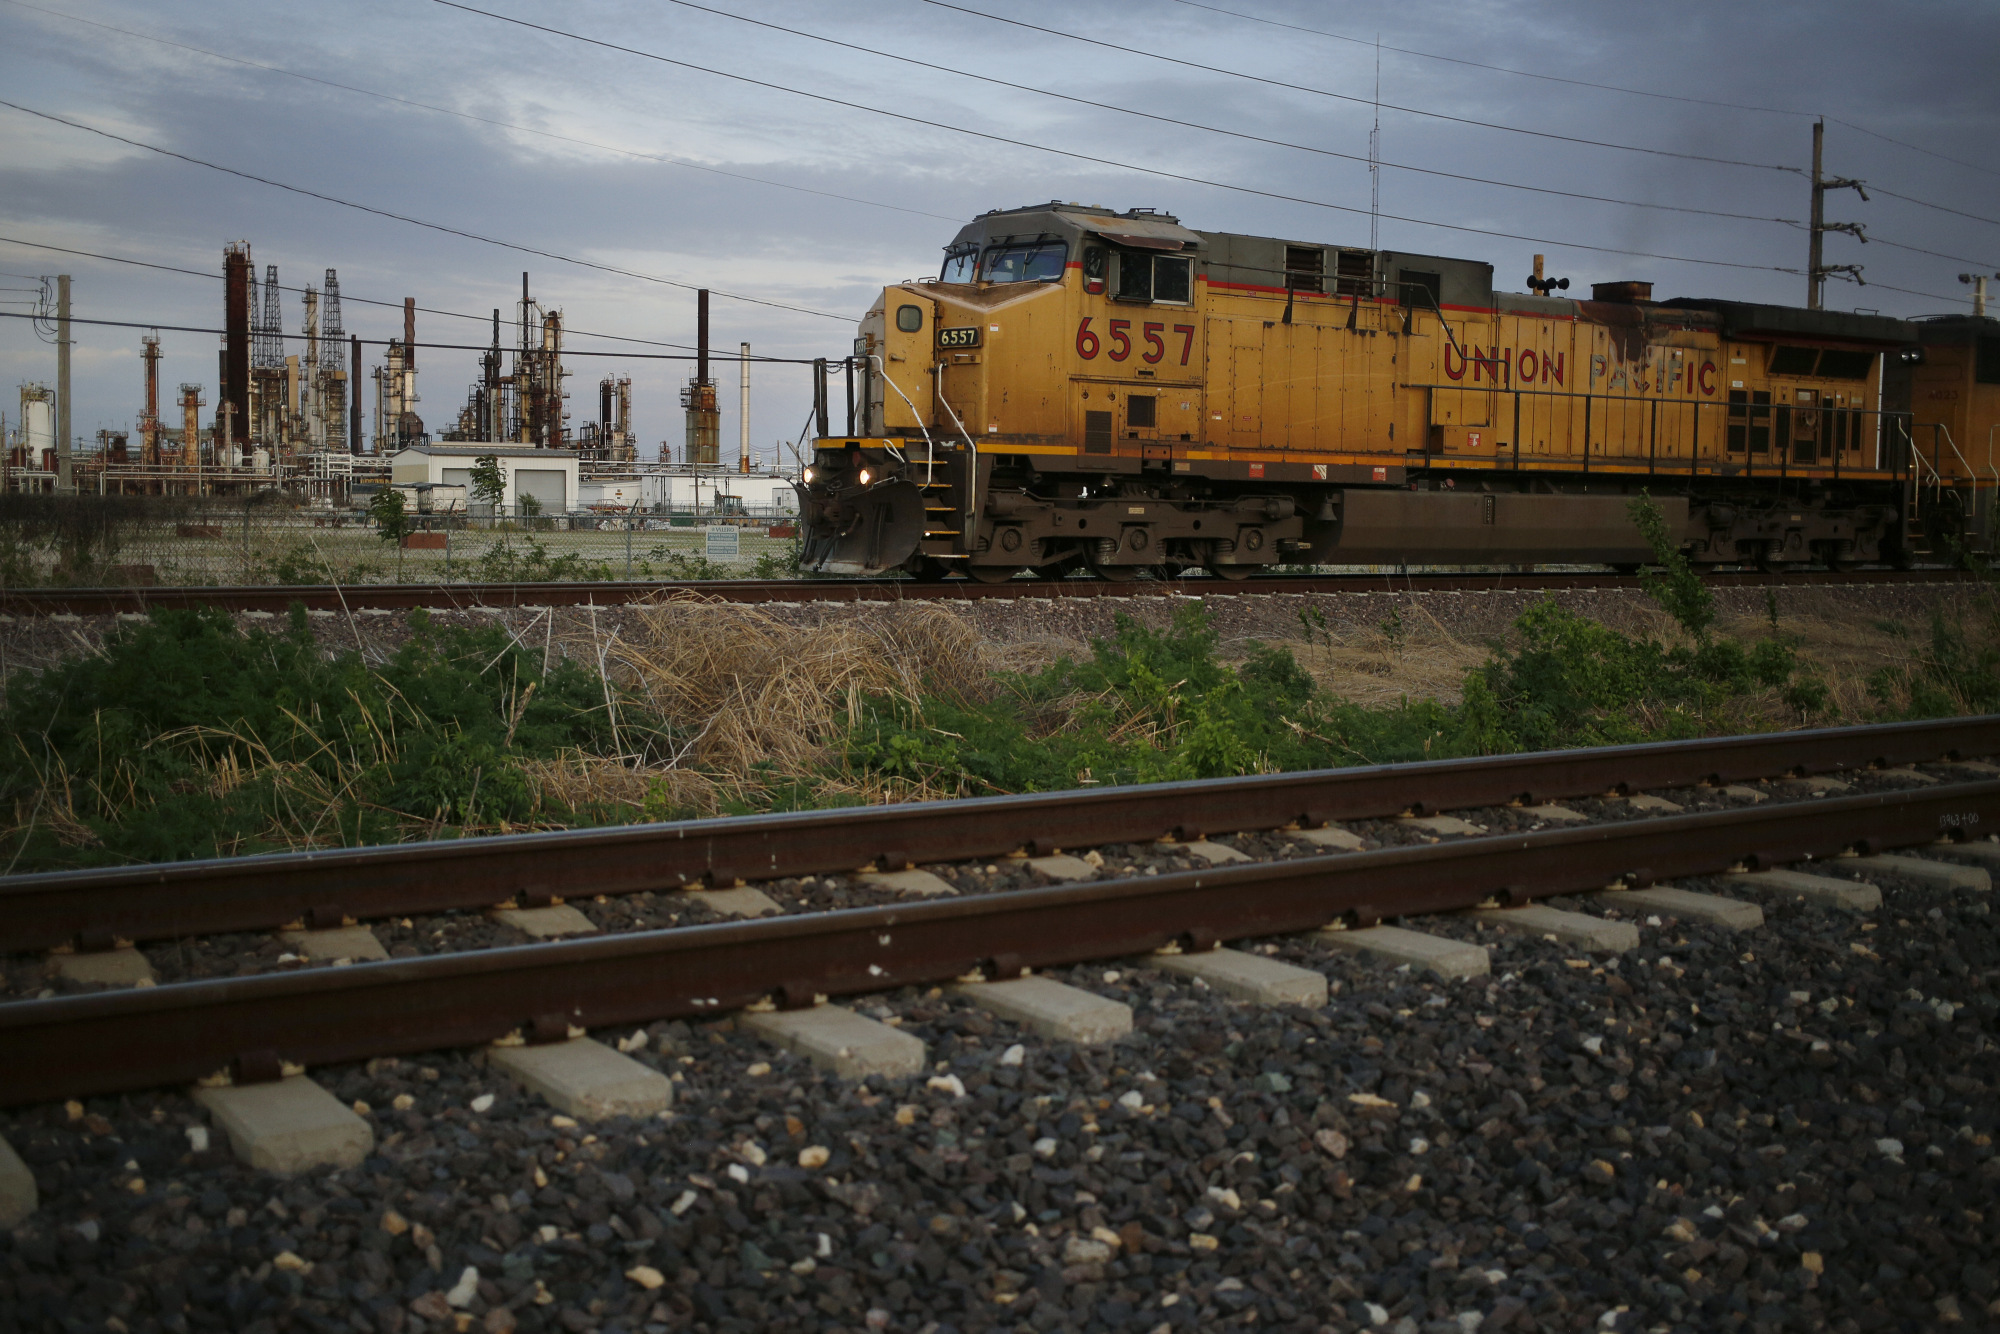 A Union Pacific Corp. freight train passes by an oil refinery in Roxana, Illinois.